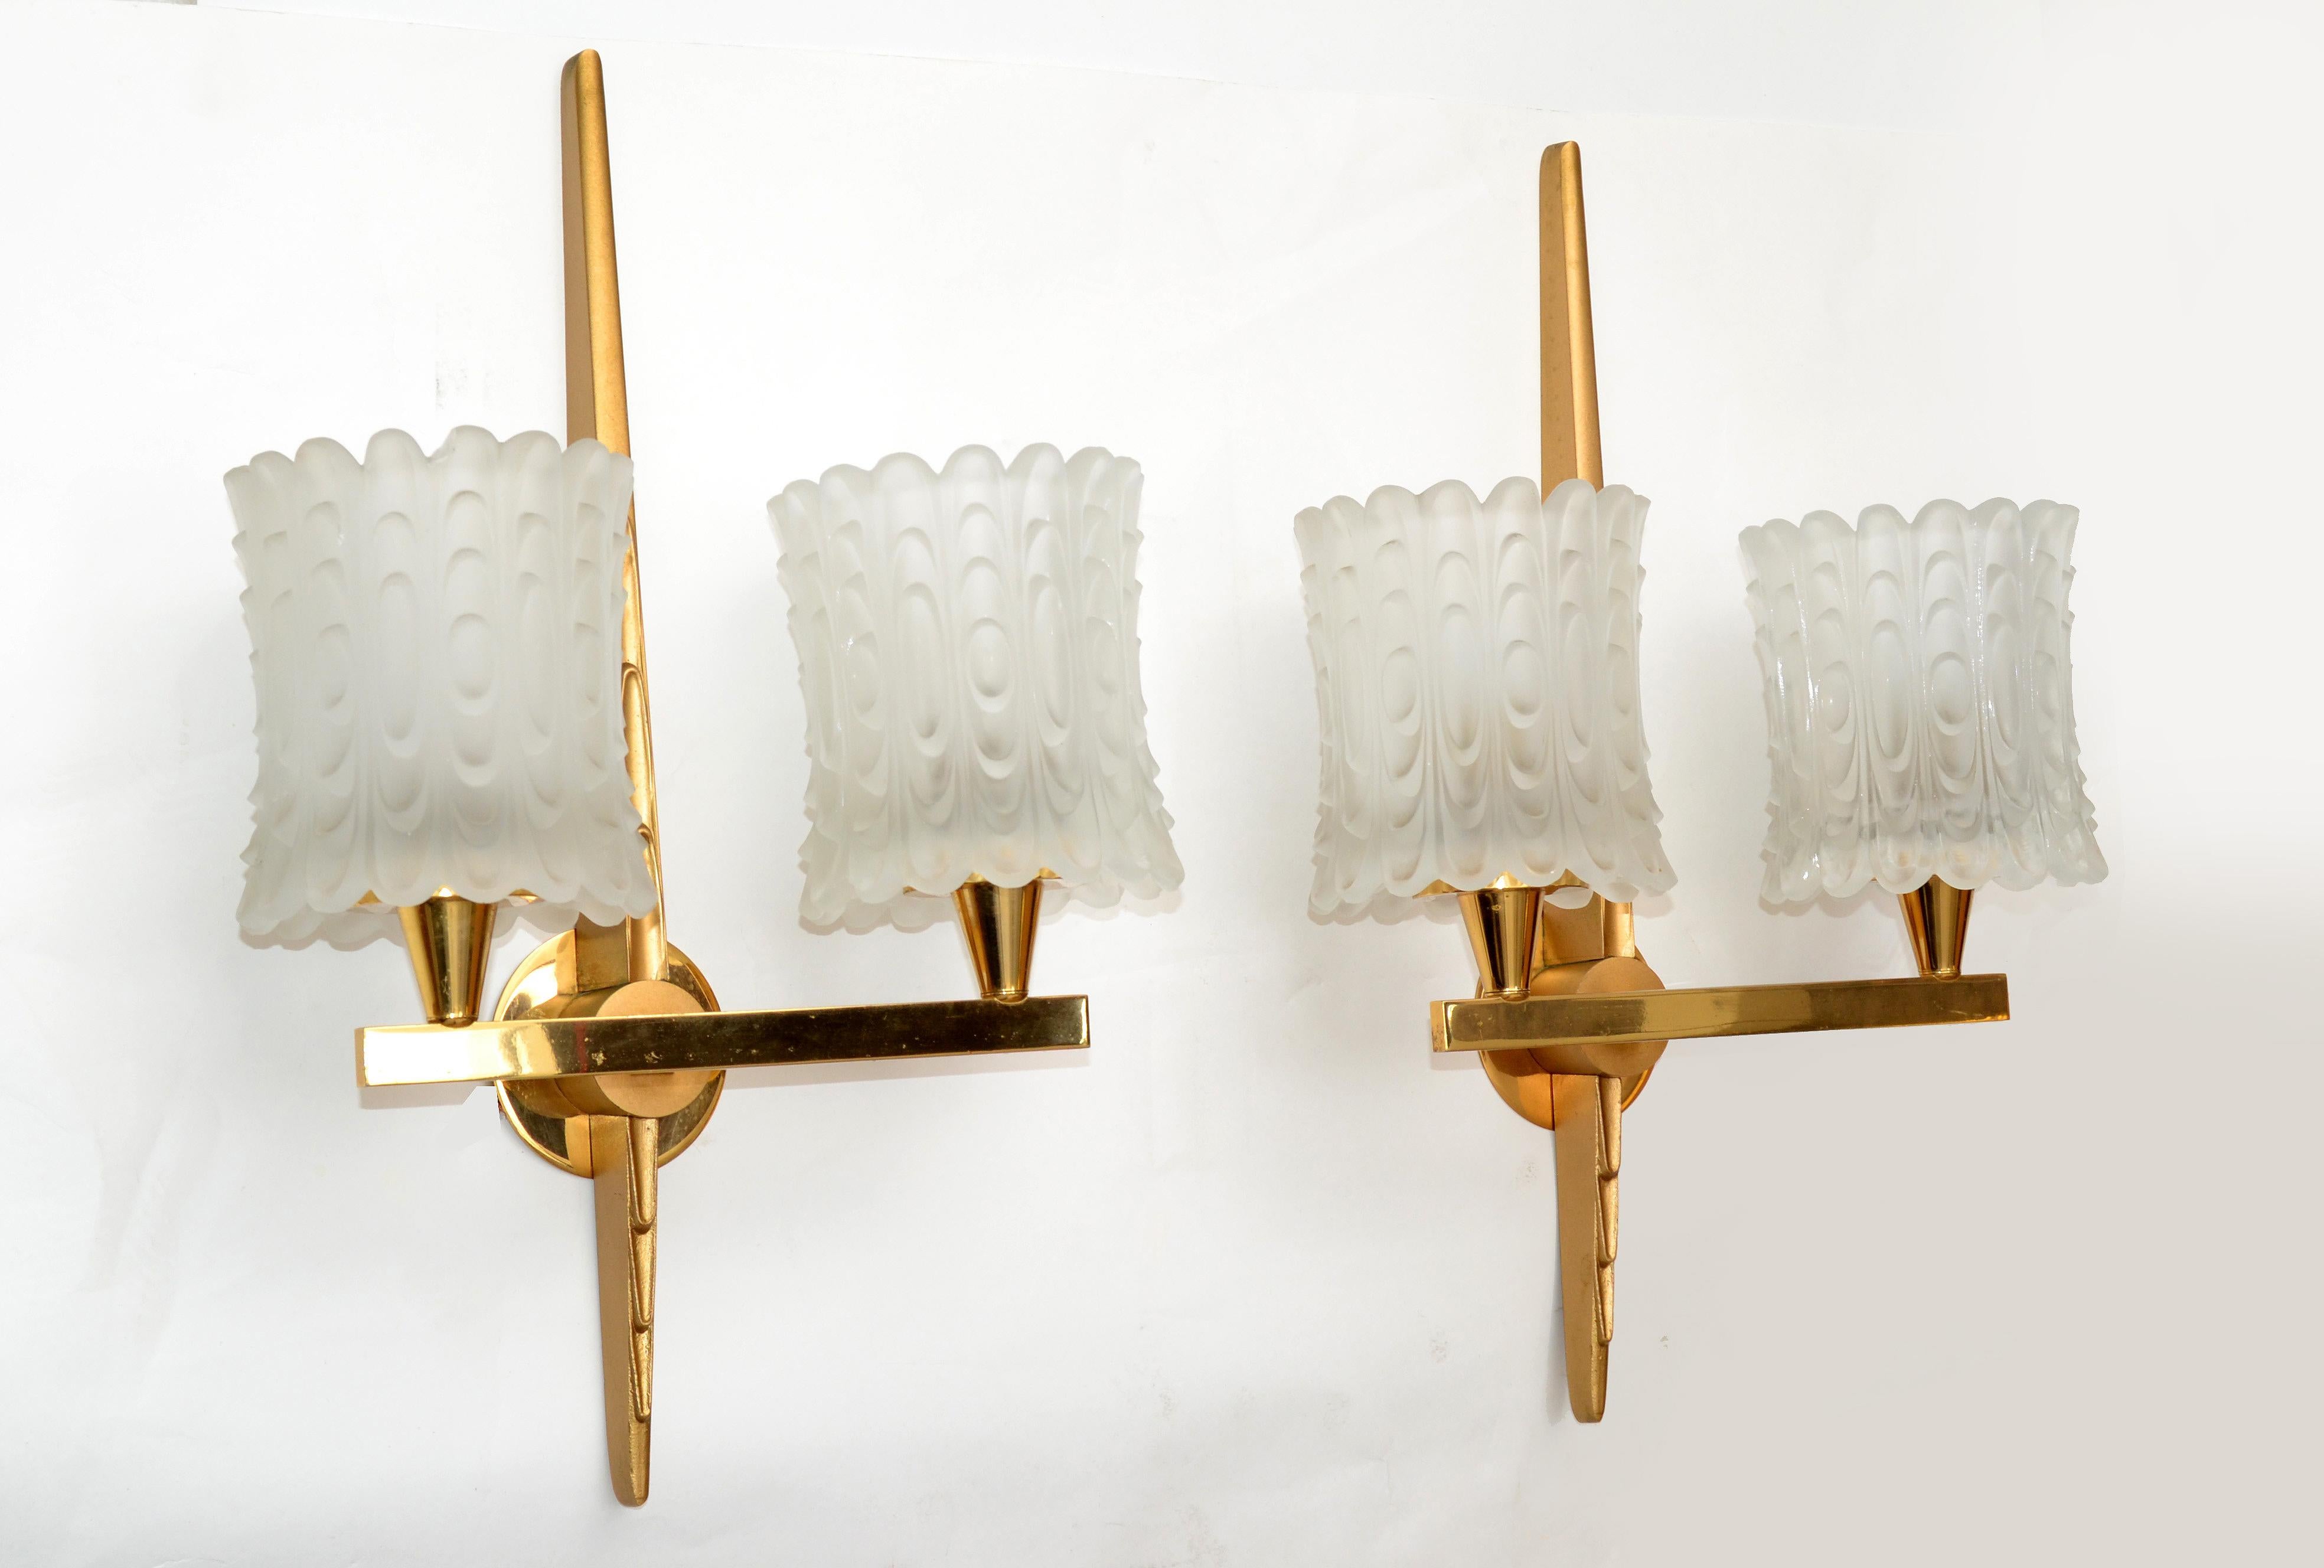 Maison Arlus Pair of Double Brass & Textured Glass Sconces Wall Lights Art Deco In Good Condition For Sale In Miami, FL